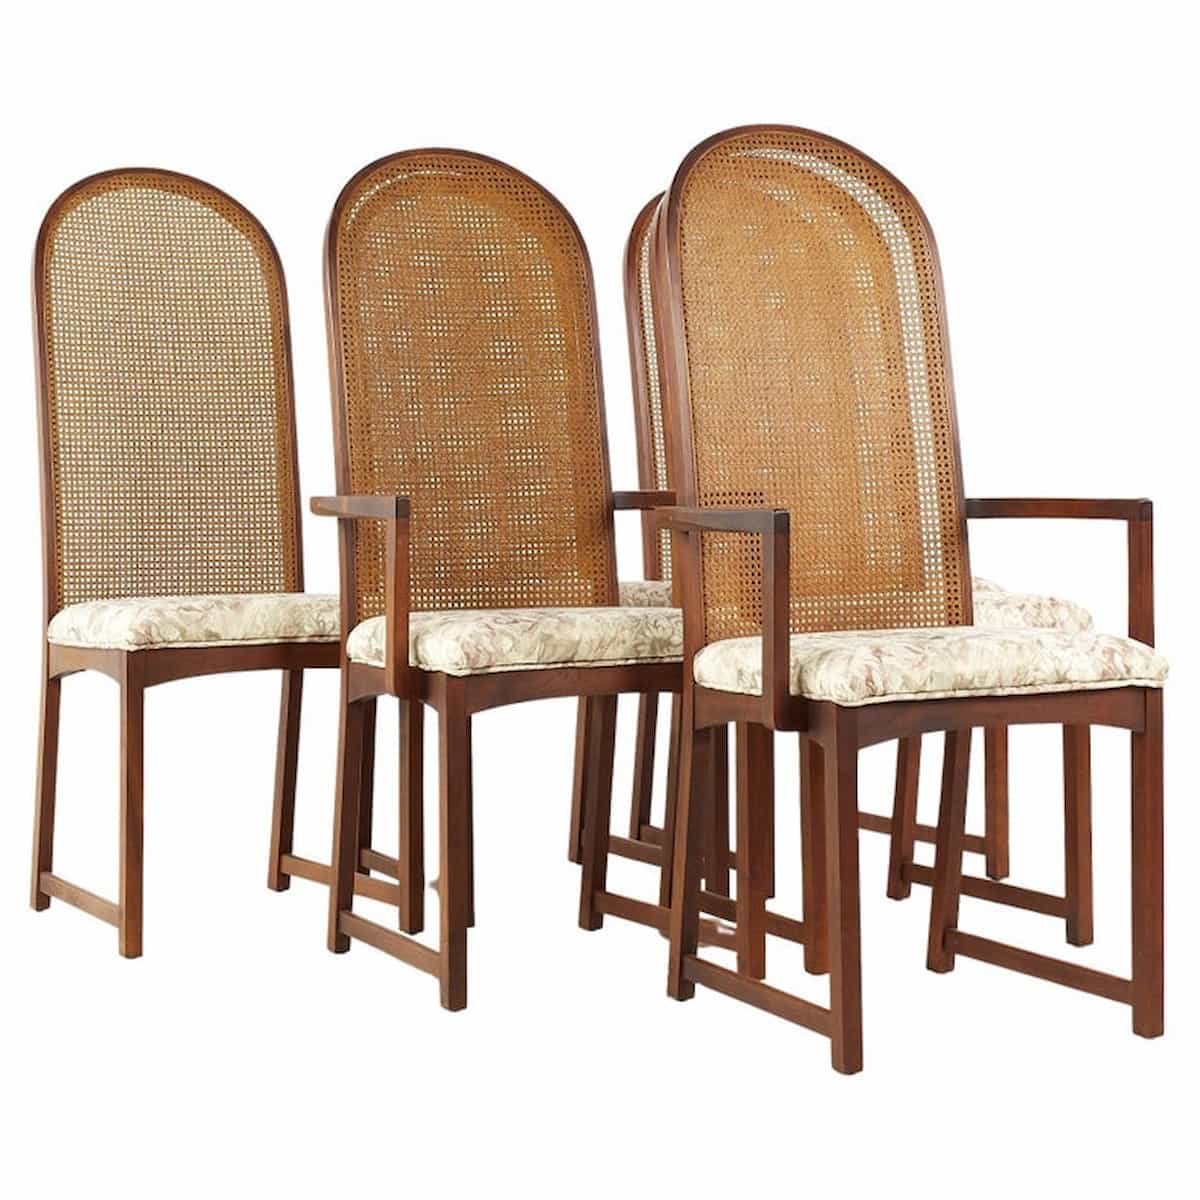 Milo Baughman for Directional of Mid Century Modern Chairs Furniture Set Modern Century Hill 6 and | Walnut Mid Back | – Dining Cane